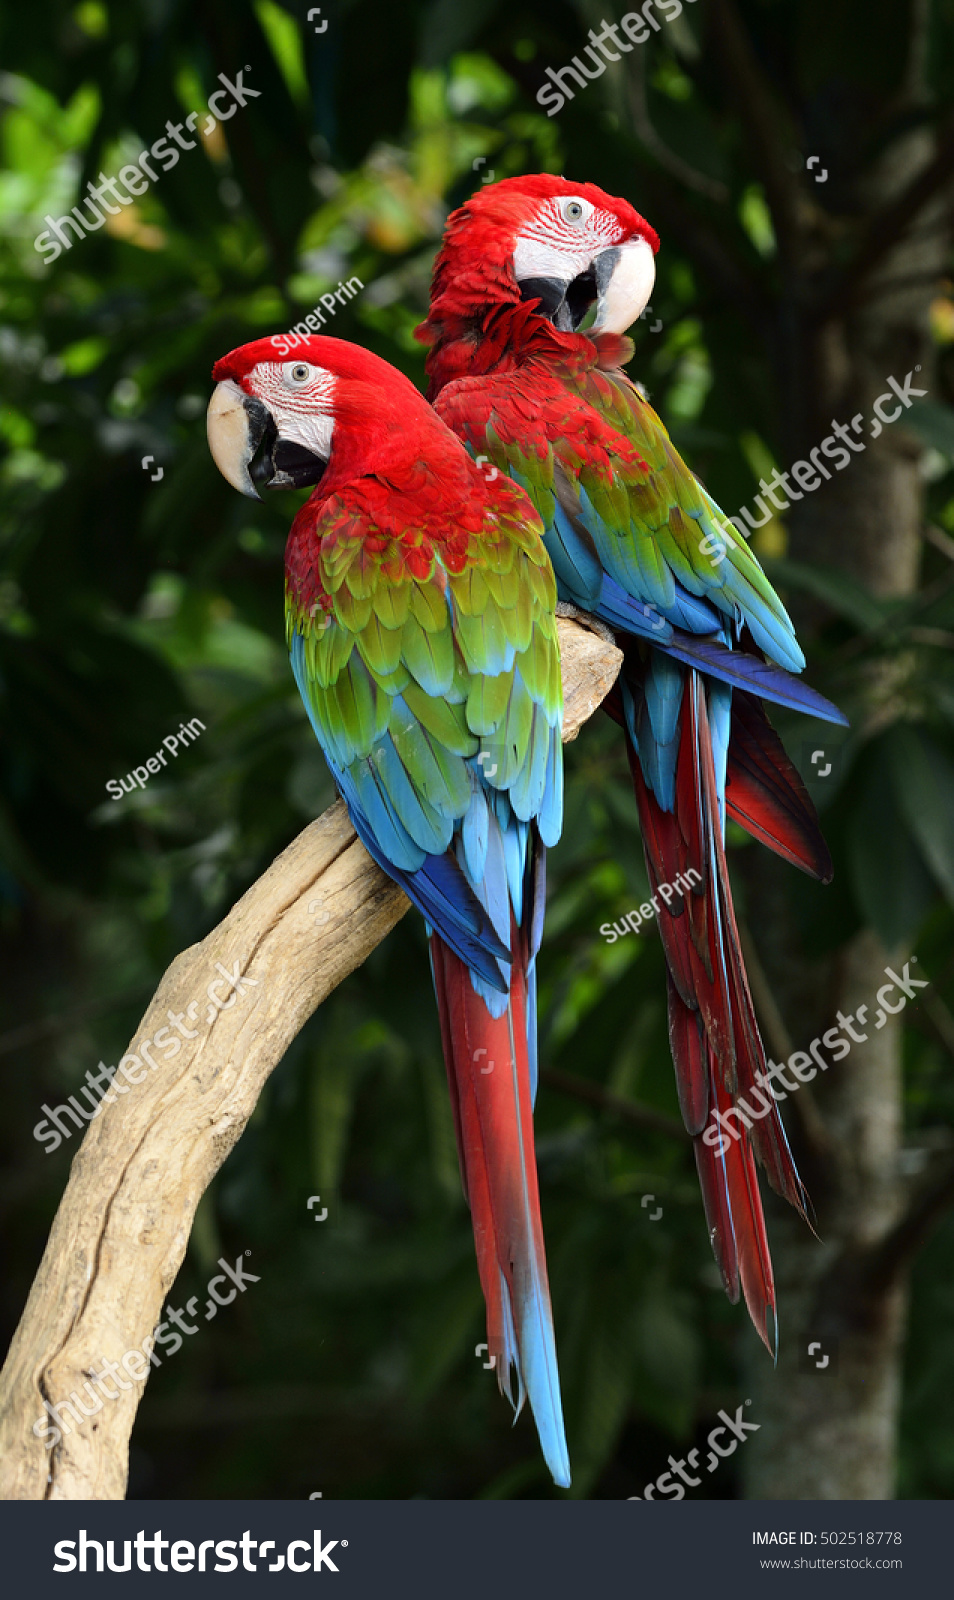 Lovely Pair Greenwinged Macaw Parrot Birds 庫存照片 立刻編輯